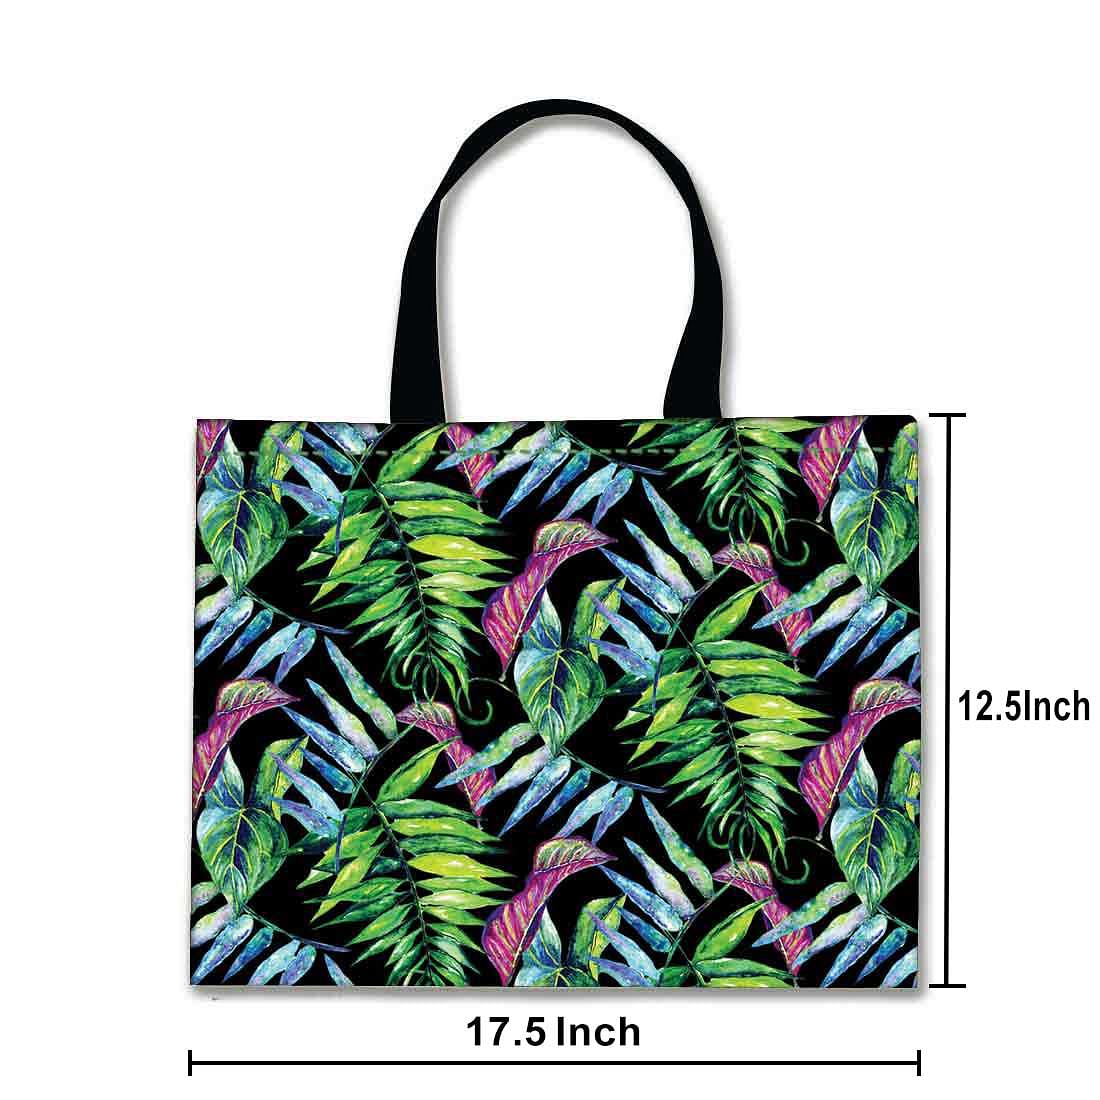 Tote bags & Shoppers - nylon - women - 442 products | FASHIOLA INDIA